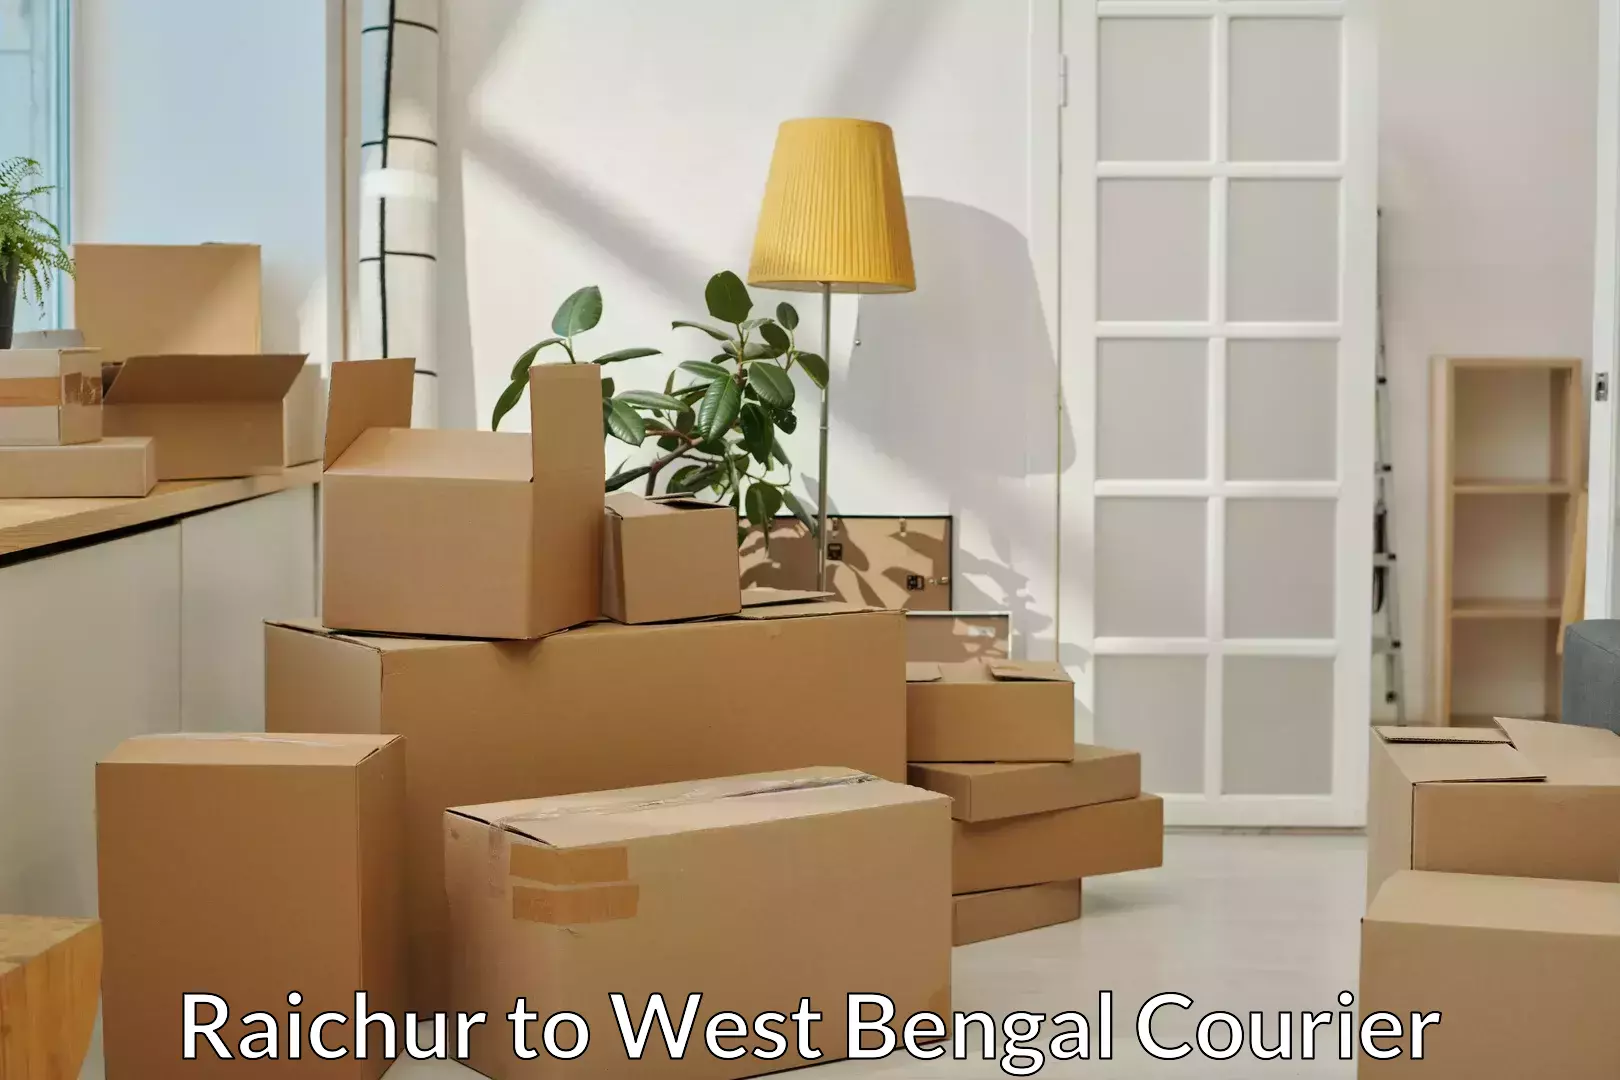 Trusted moving company Raichur to West Bengal